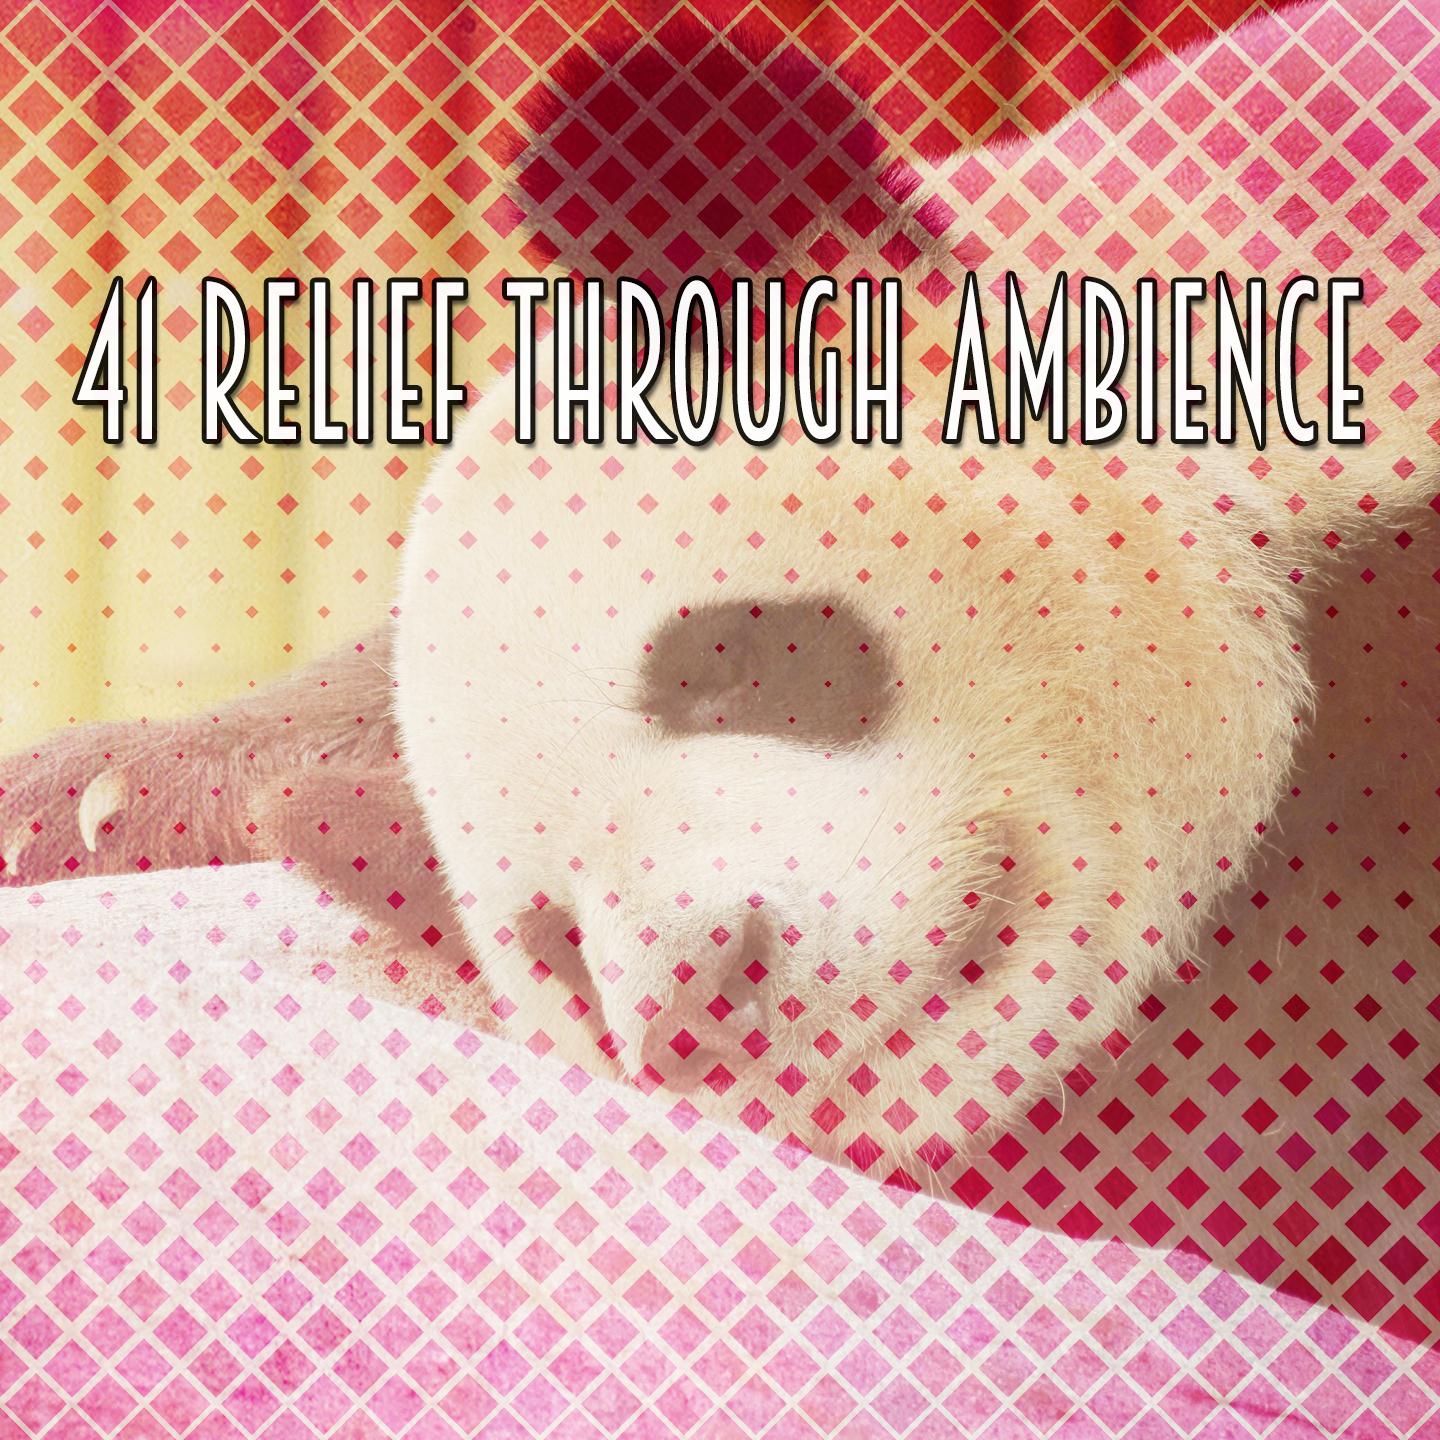 41 Relief Through Ambience